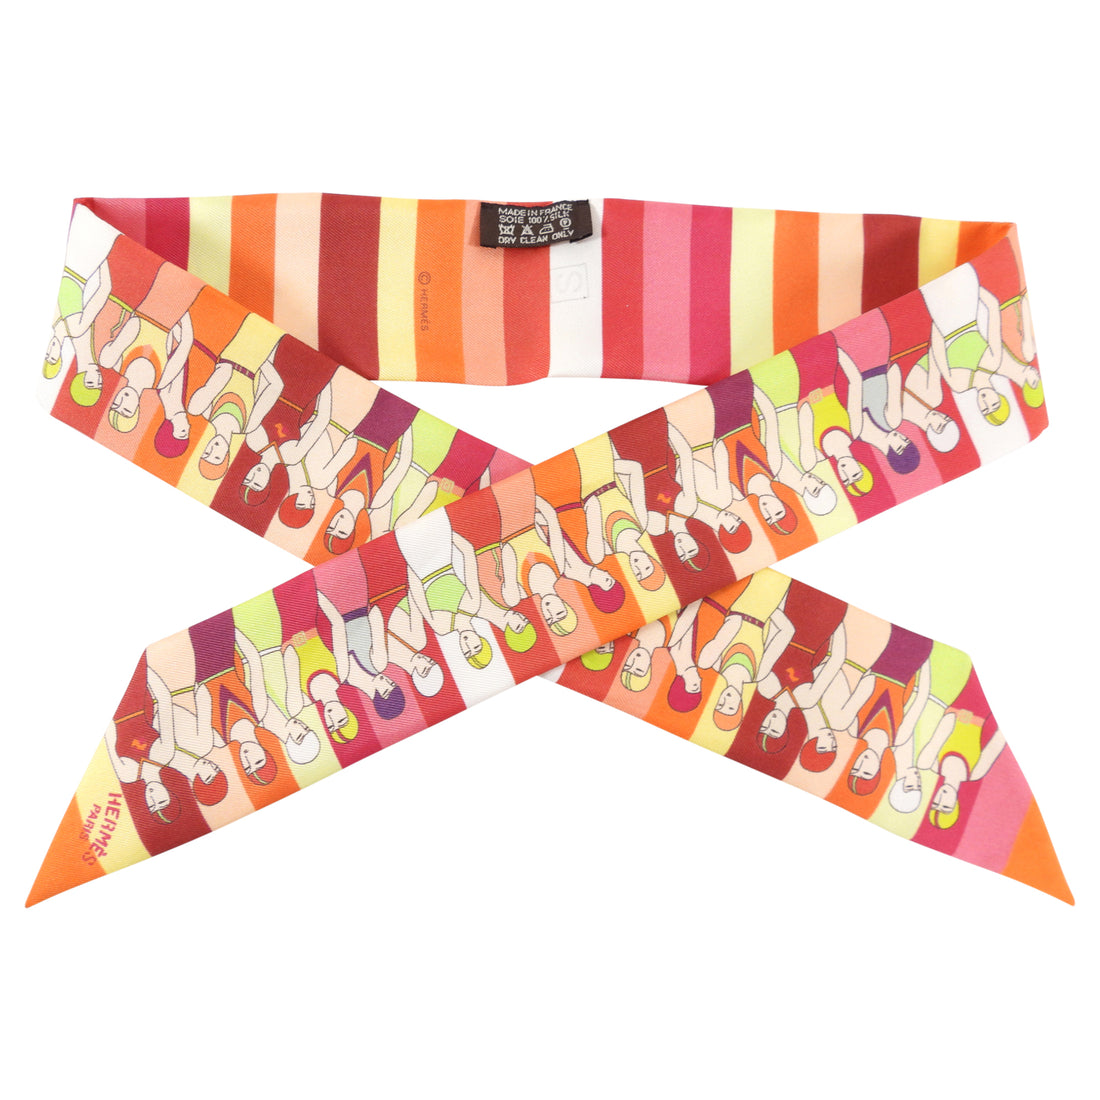 Hermes Art Deco Pink and Orange Bathers Twilly Scarf